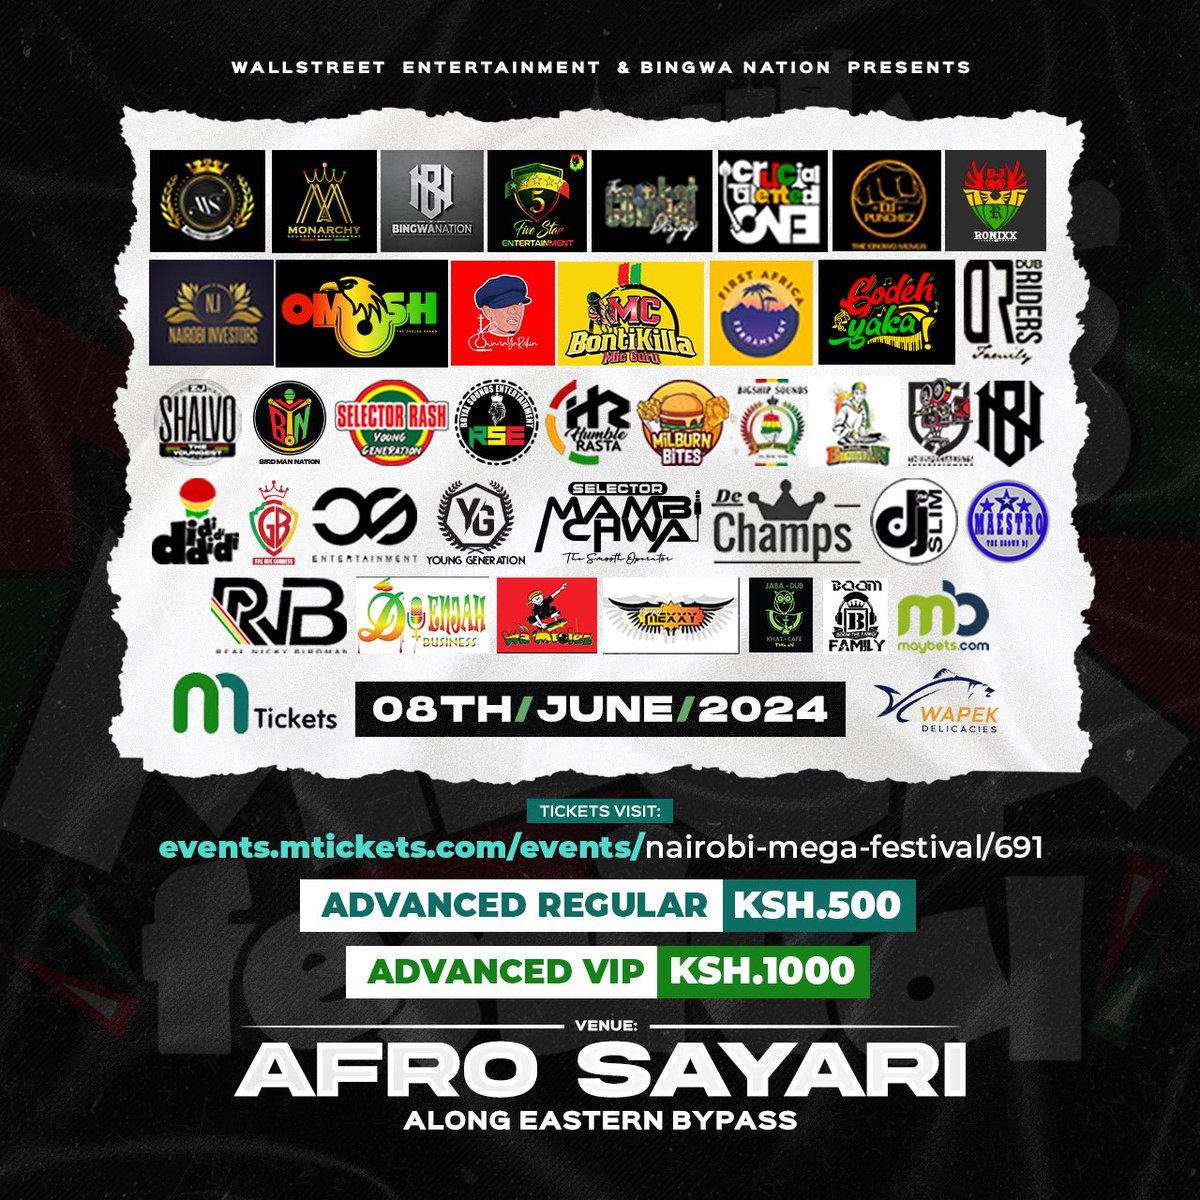 Wall Street Entertainment and bingwa nation comes with a one time major Event for the reggae lovers Check poster for details hii nayo itakua moto🔥🔥🔥 Get your tickets from events.mtickets.com/events/nairobi…